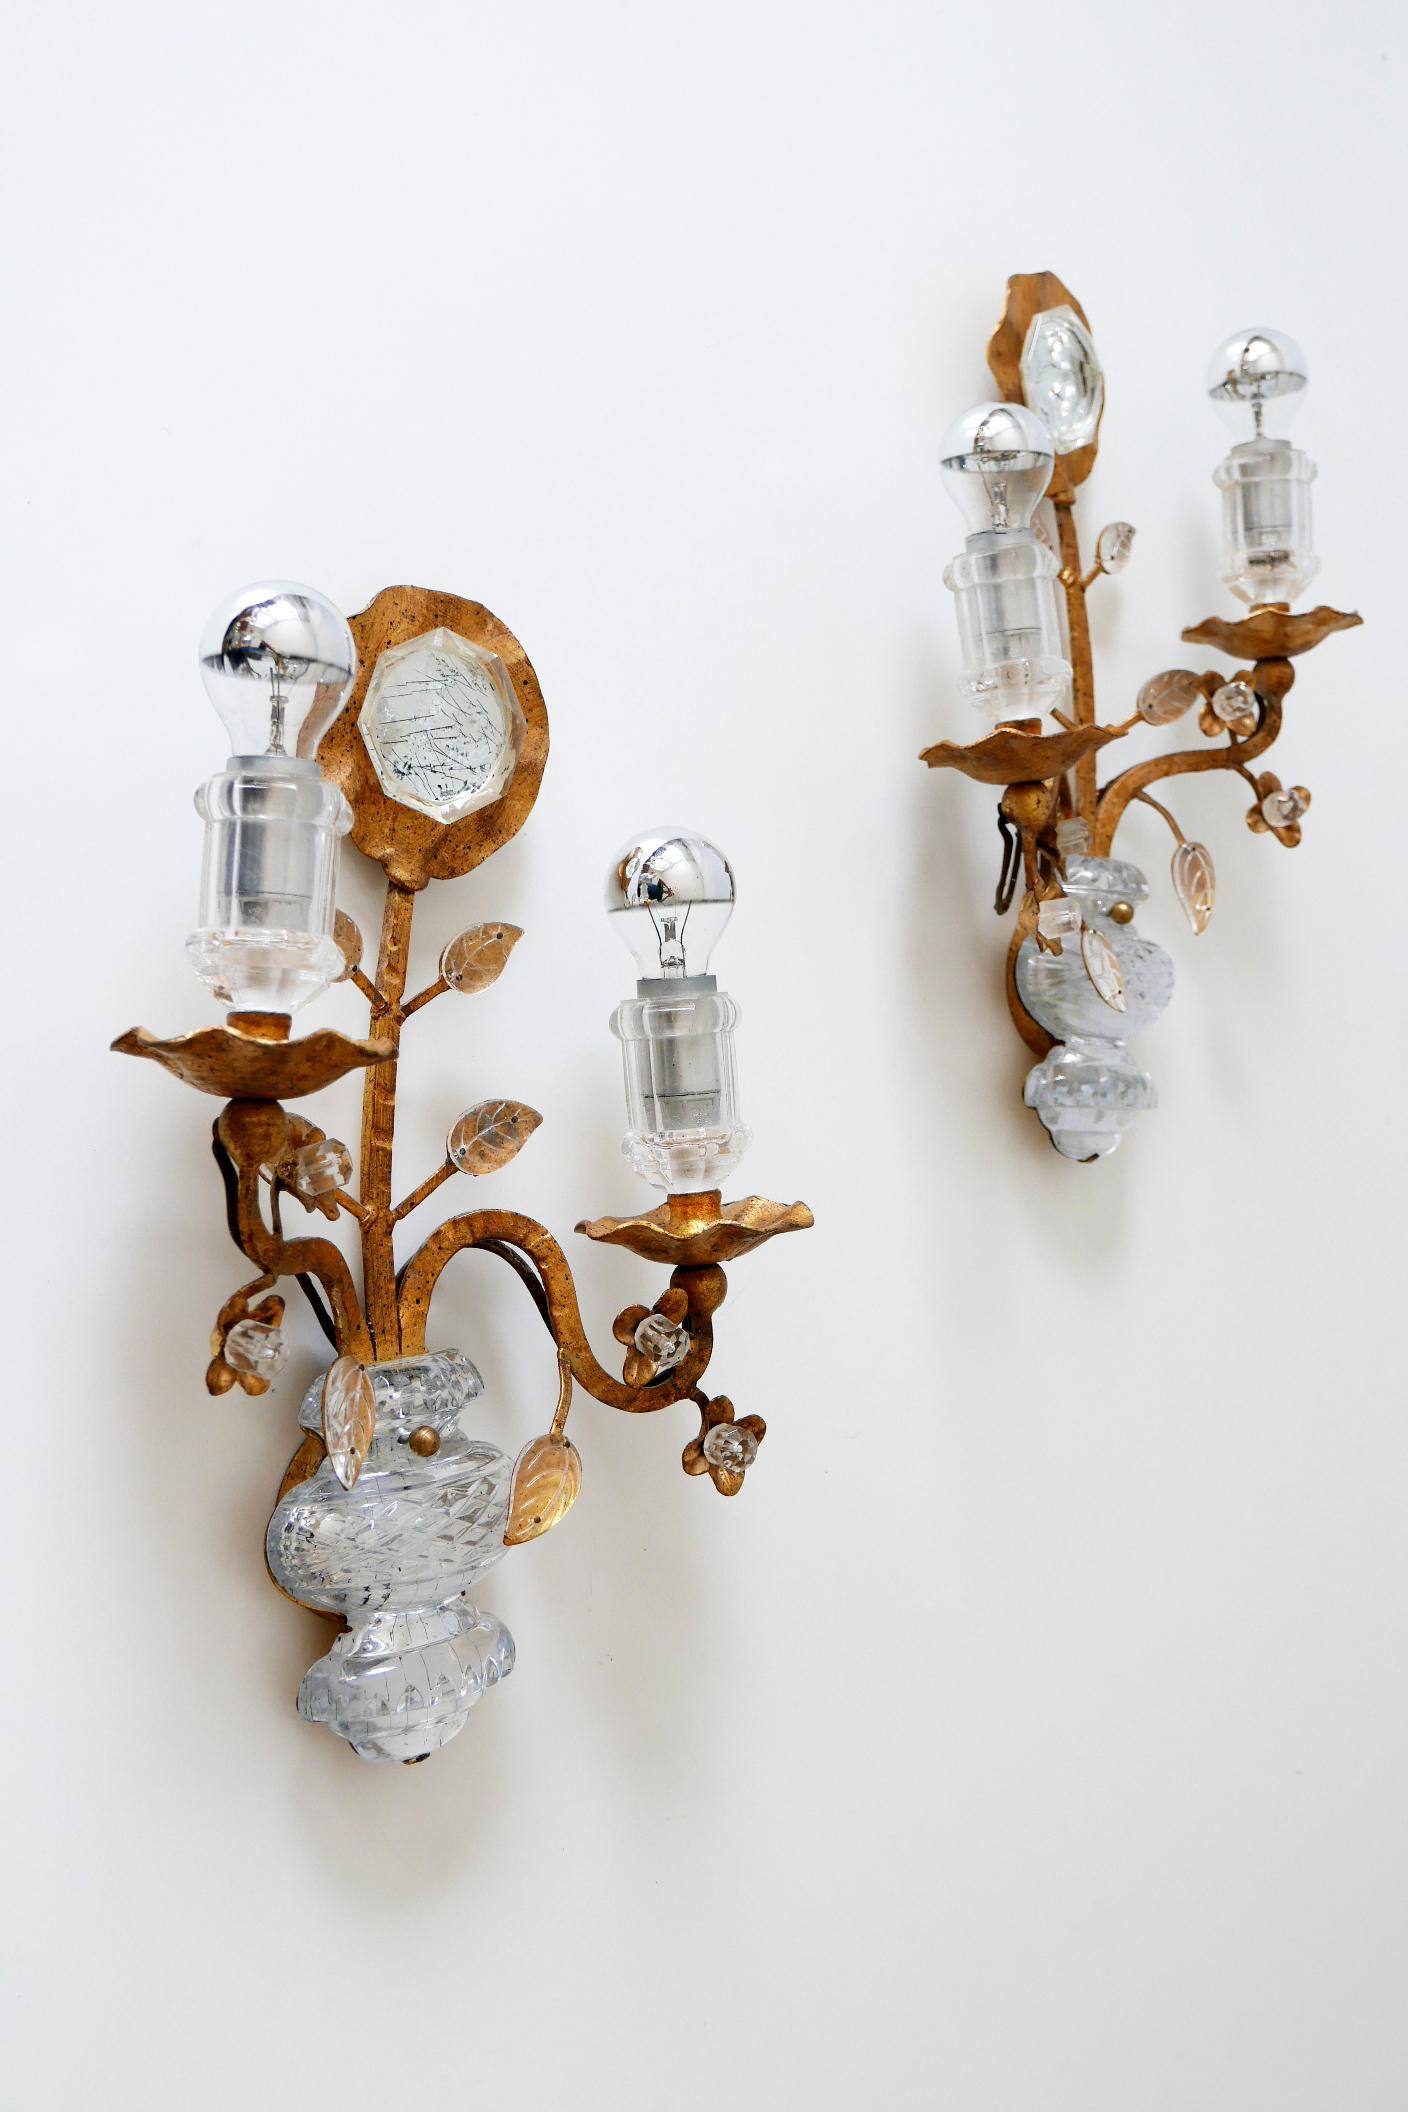 Mid-20th Century Set of Two Maison Baguès Crystal & Gilt Metal Sconces or Wall Lamps 1960s France For Sale